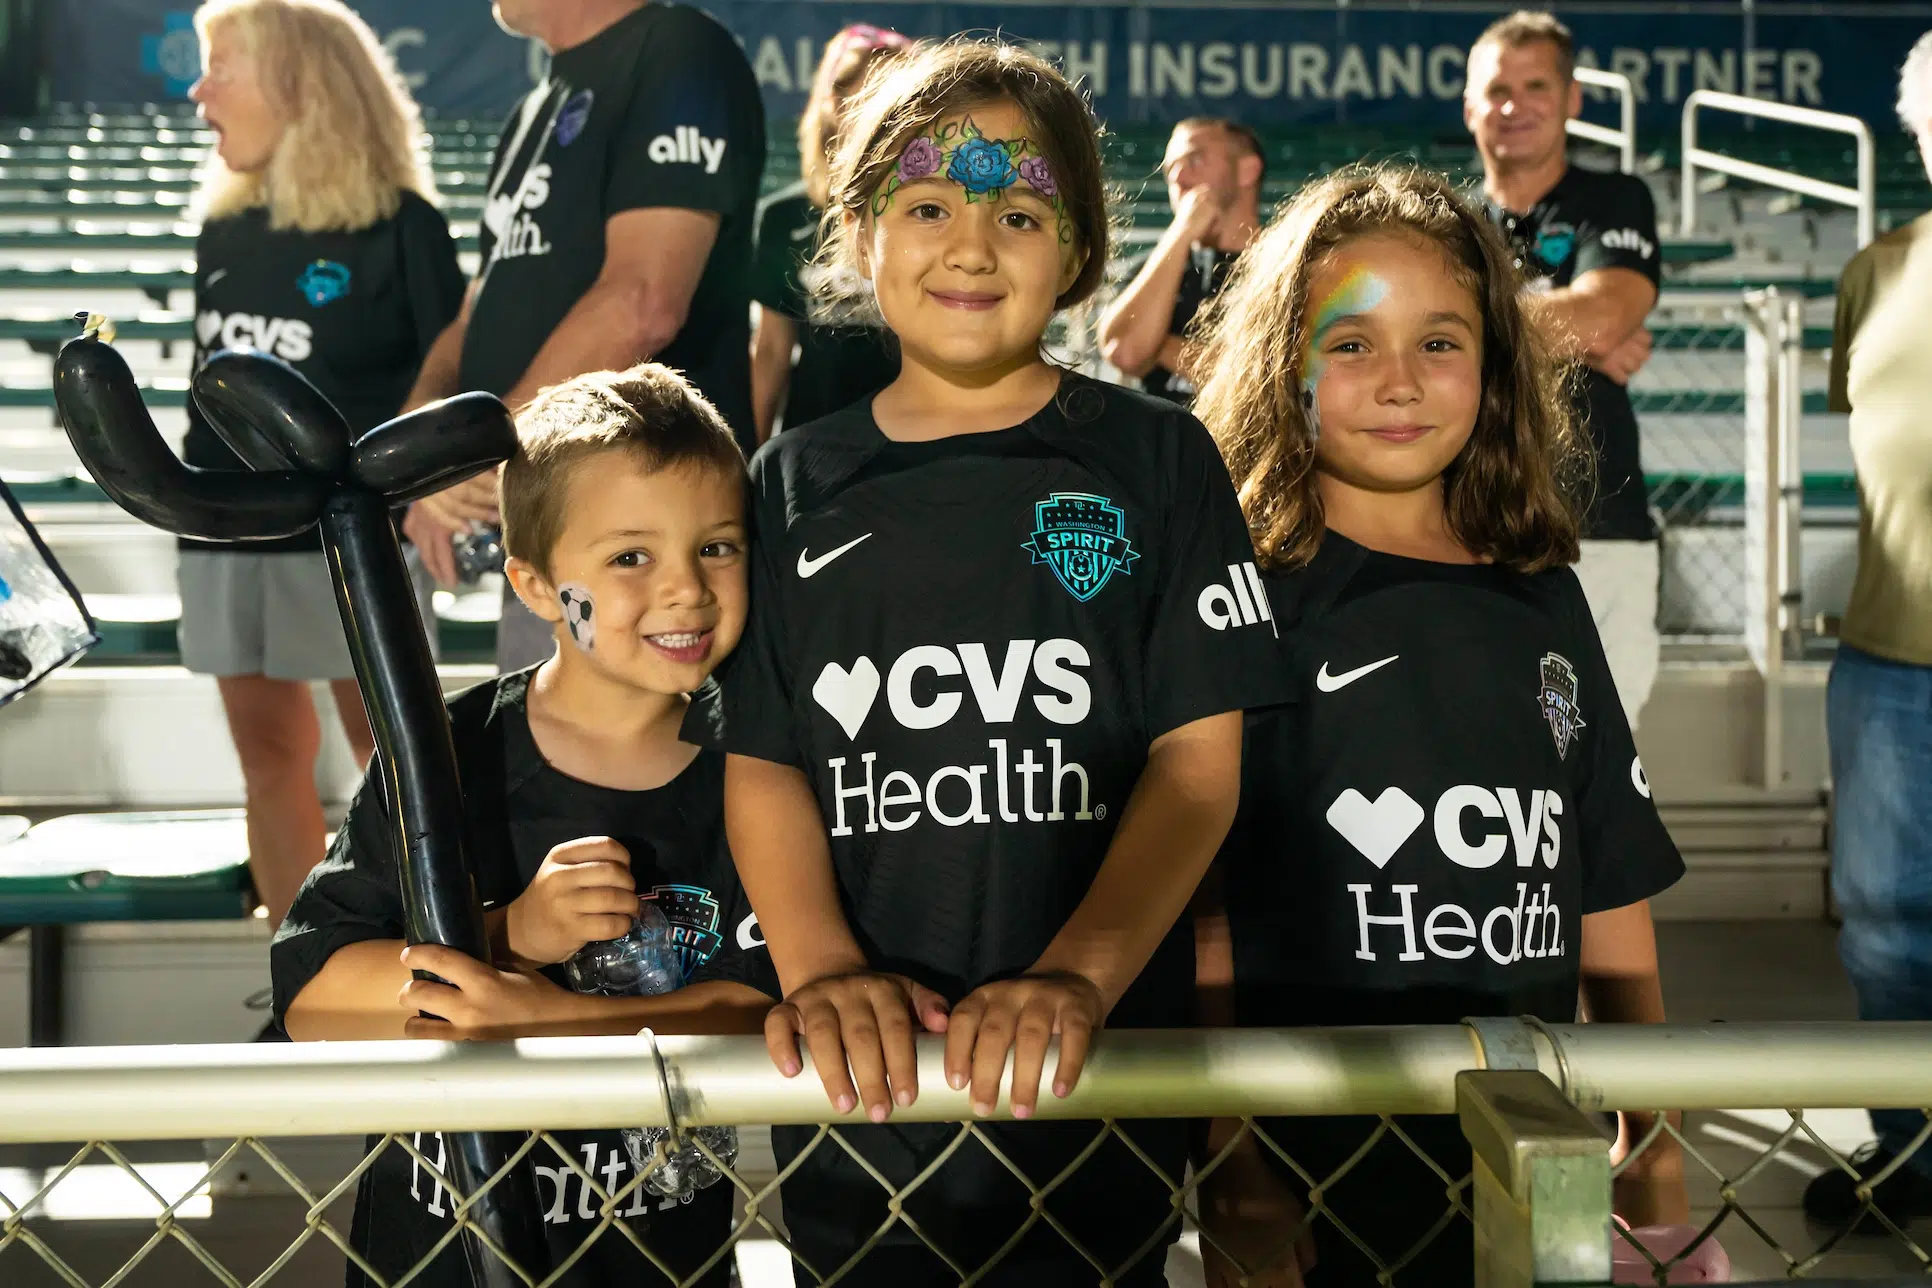 A young boy and two girls with decorative and sparkly face paint wear matching black uniforms and stand along the bleachers of a soccer stadium.